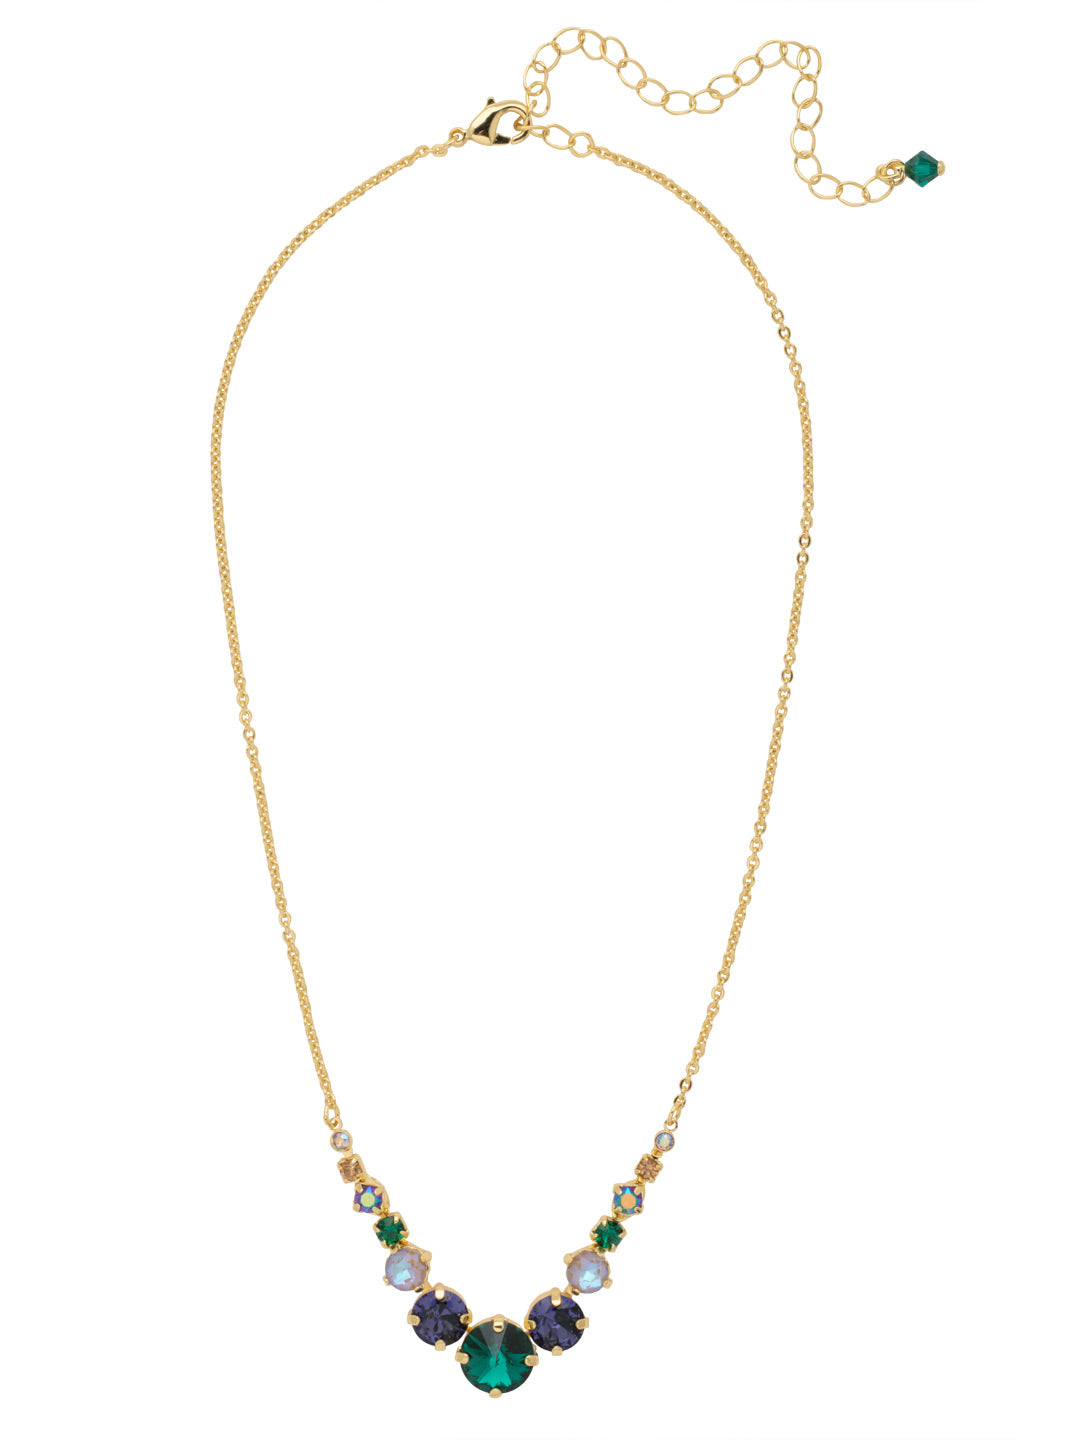 London Tennis Necklace - NCQ14BGMDG - <p>A long, simple chain paired with gorgeous round stones is exactly what every girl needs to dress things up. This round stone necklace is perfect for layering, or to just wear alone. Let the simple sparkle take over. From Sorrelli's Mardi Gras collection in our Bright Gold-tone finish.</p>